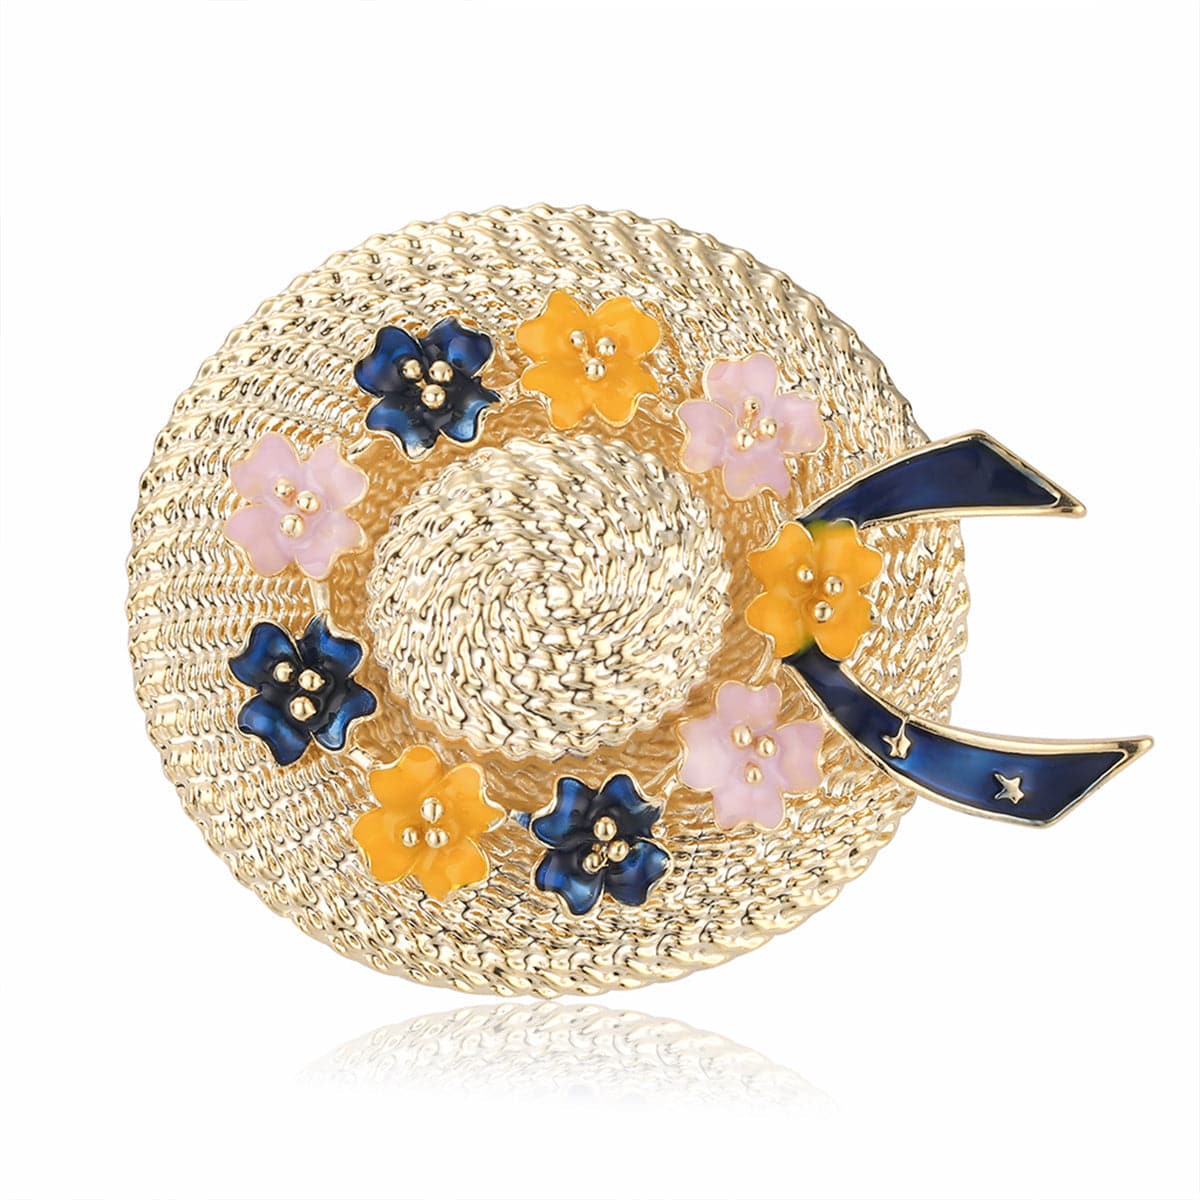 Enamel & 18K Gold-Plated Floral Sunhat Brooch